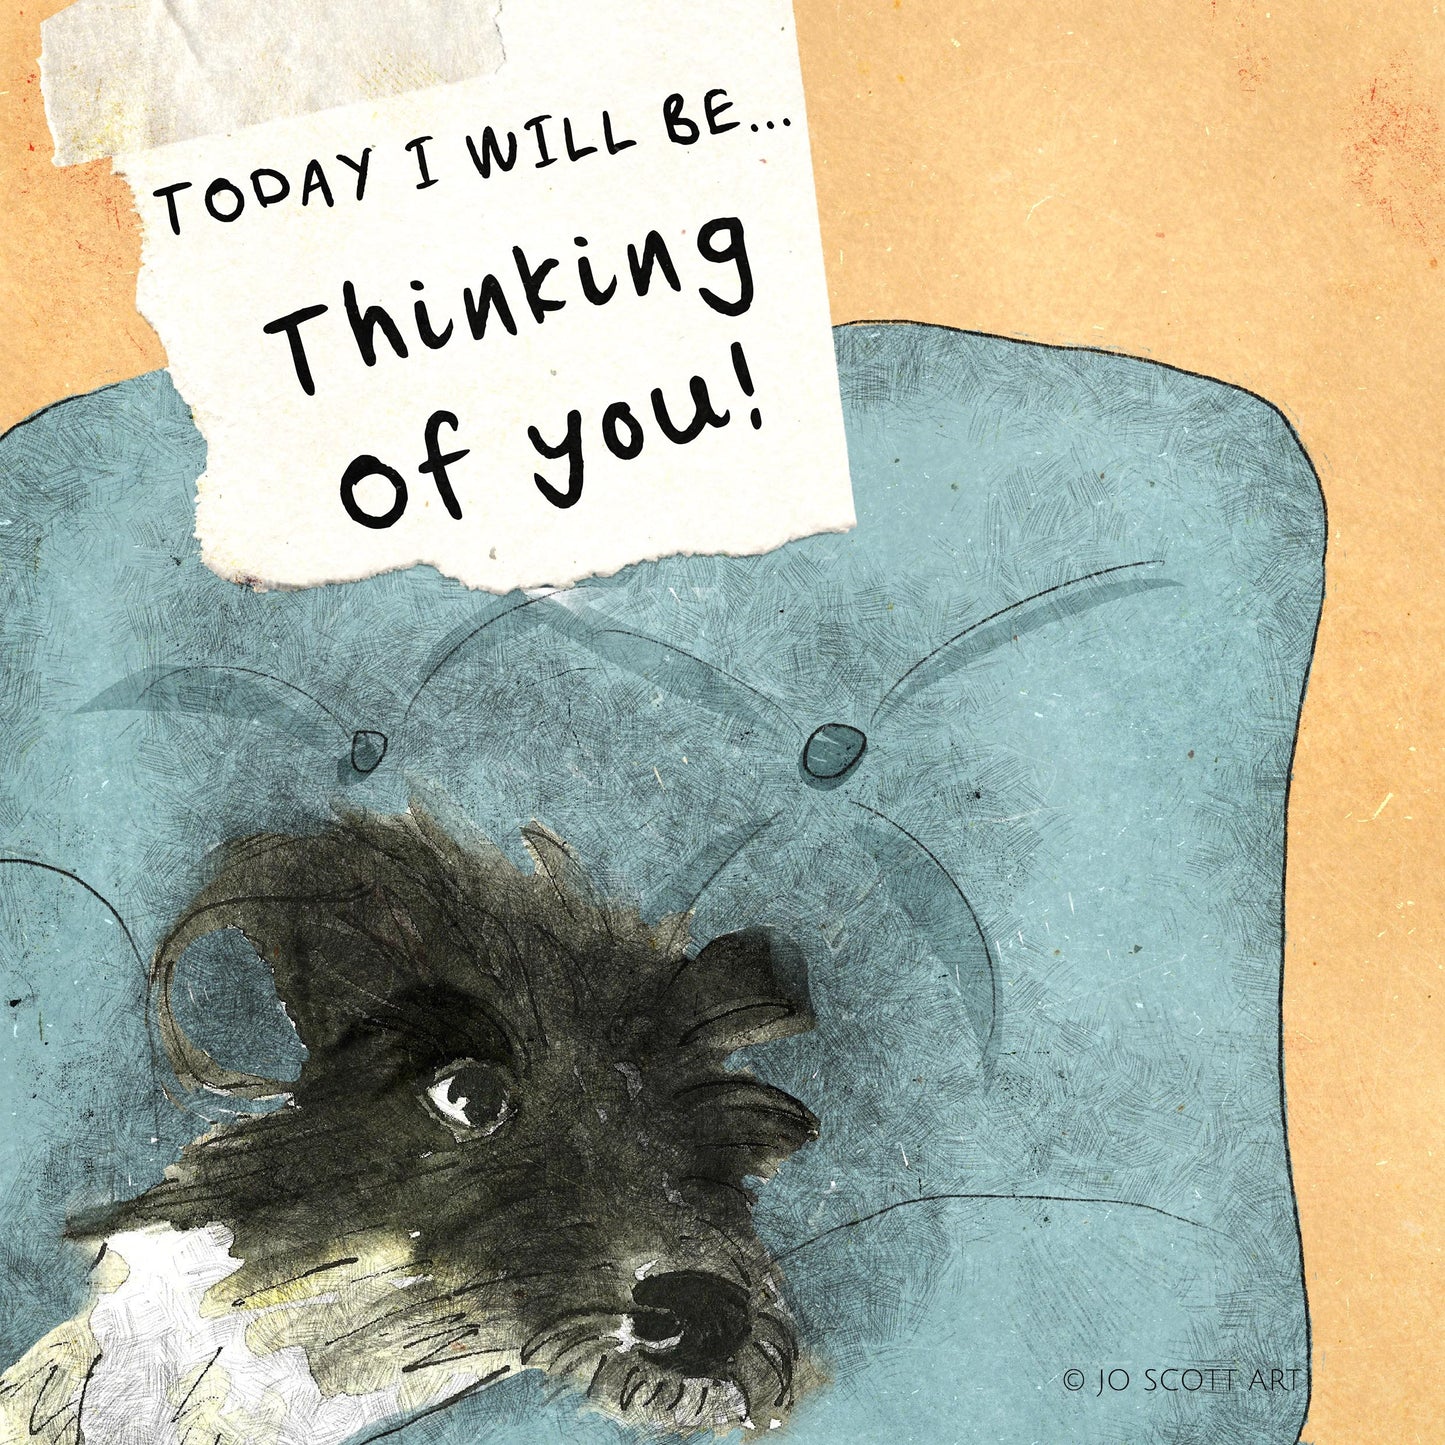 Load image into Gallery viewer, Today I will be... Thinking of you - Greeting Card
